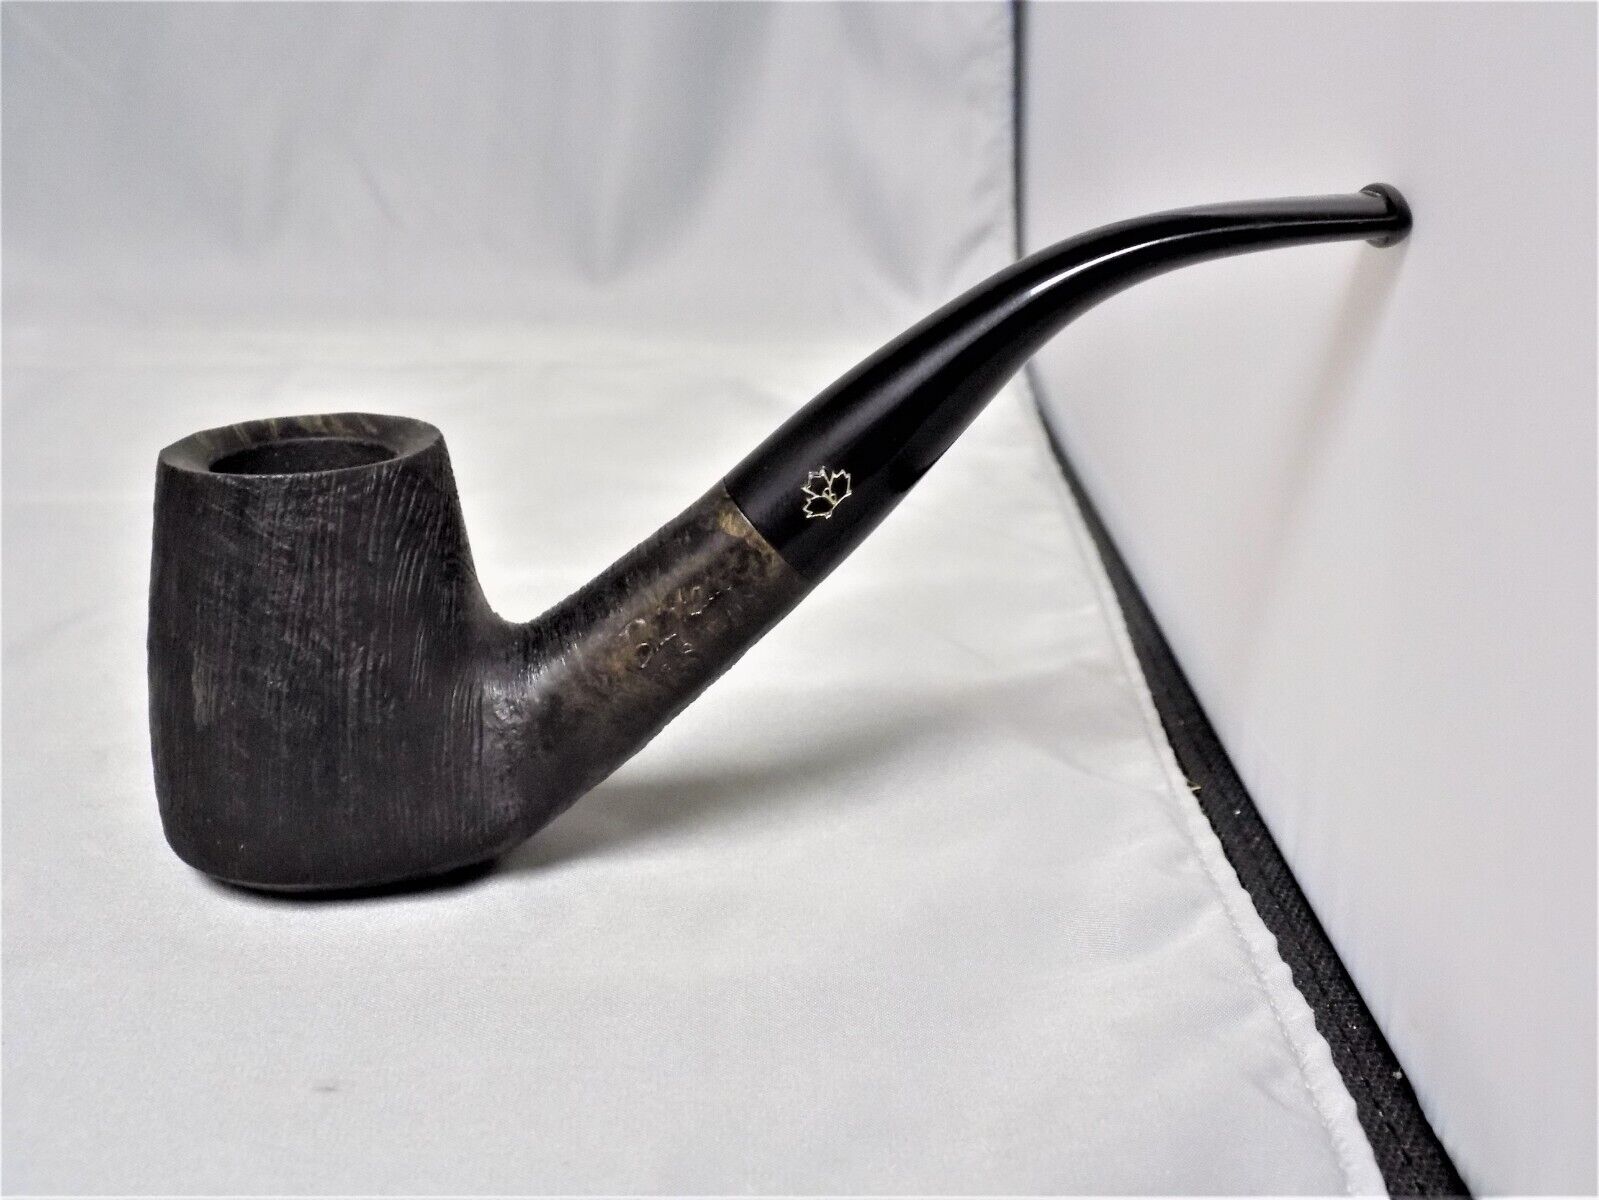 VERY NIICE BRIGHAM SYSTEM RUSTIC VOLCANO PRE-OWNED BRIAR PIPE GREAT CONDITION